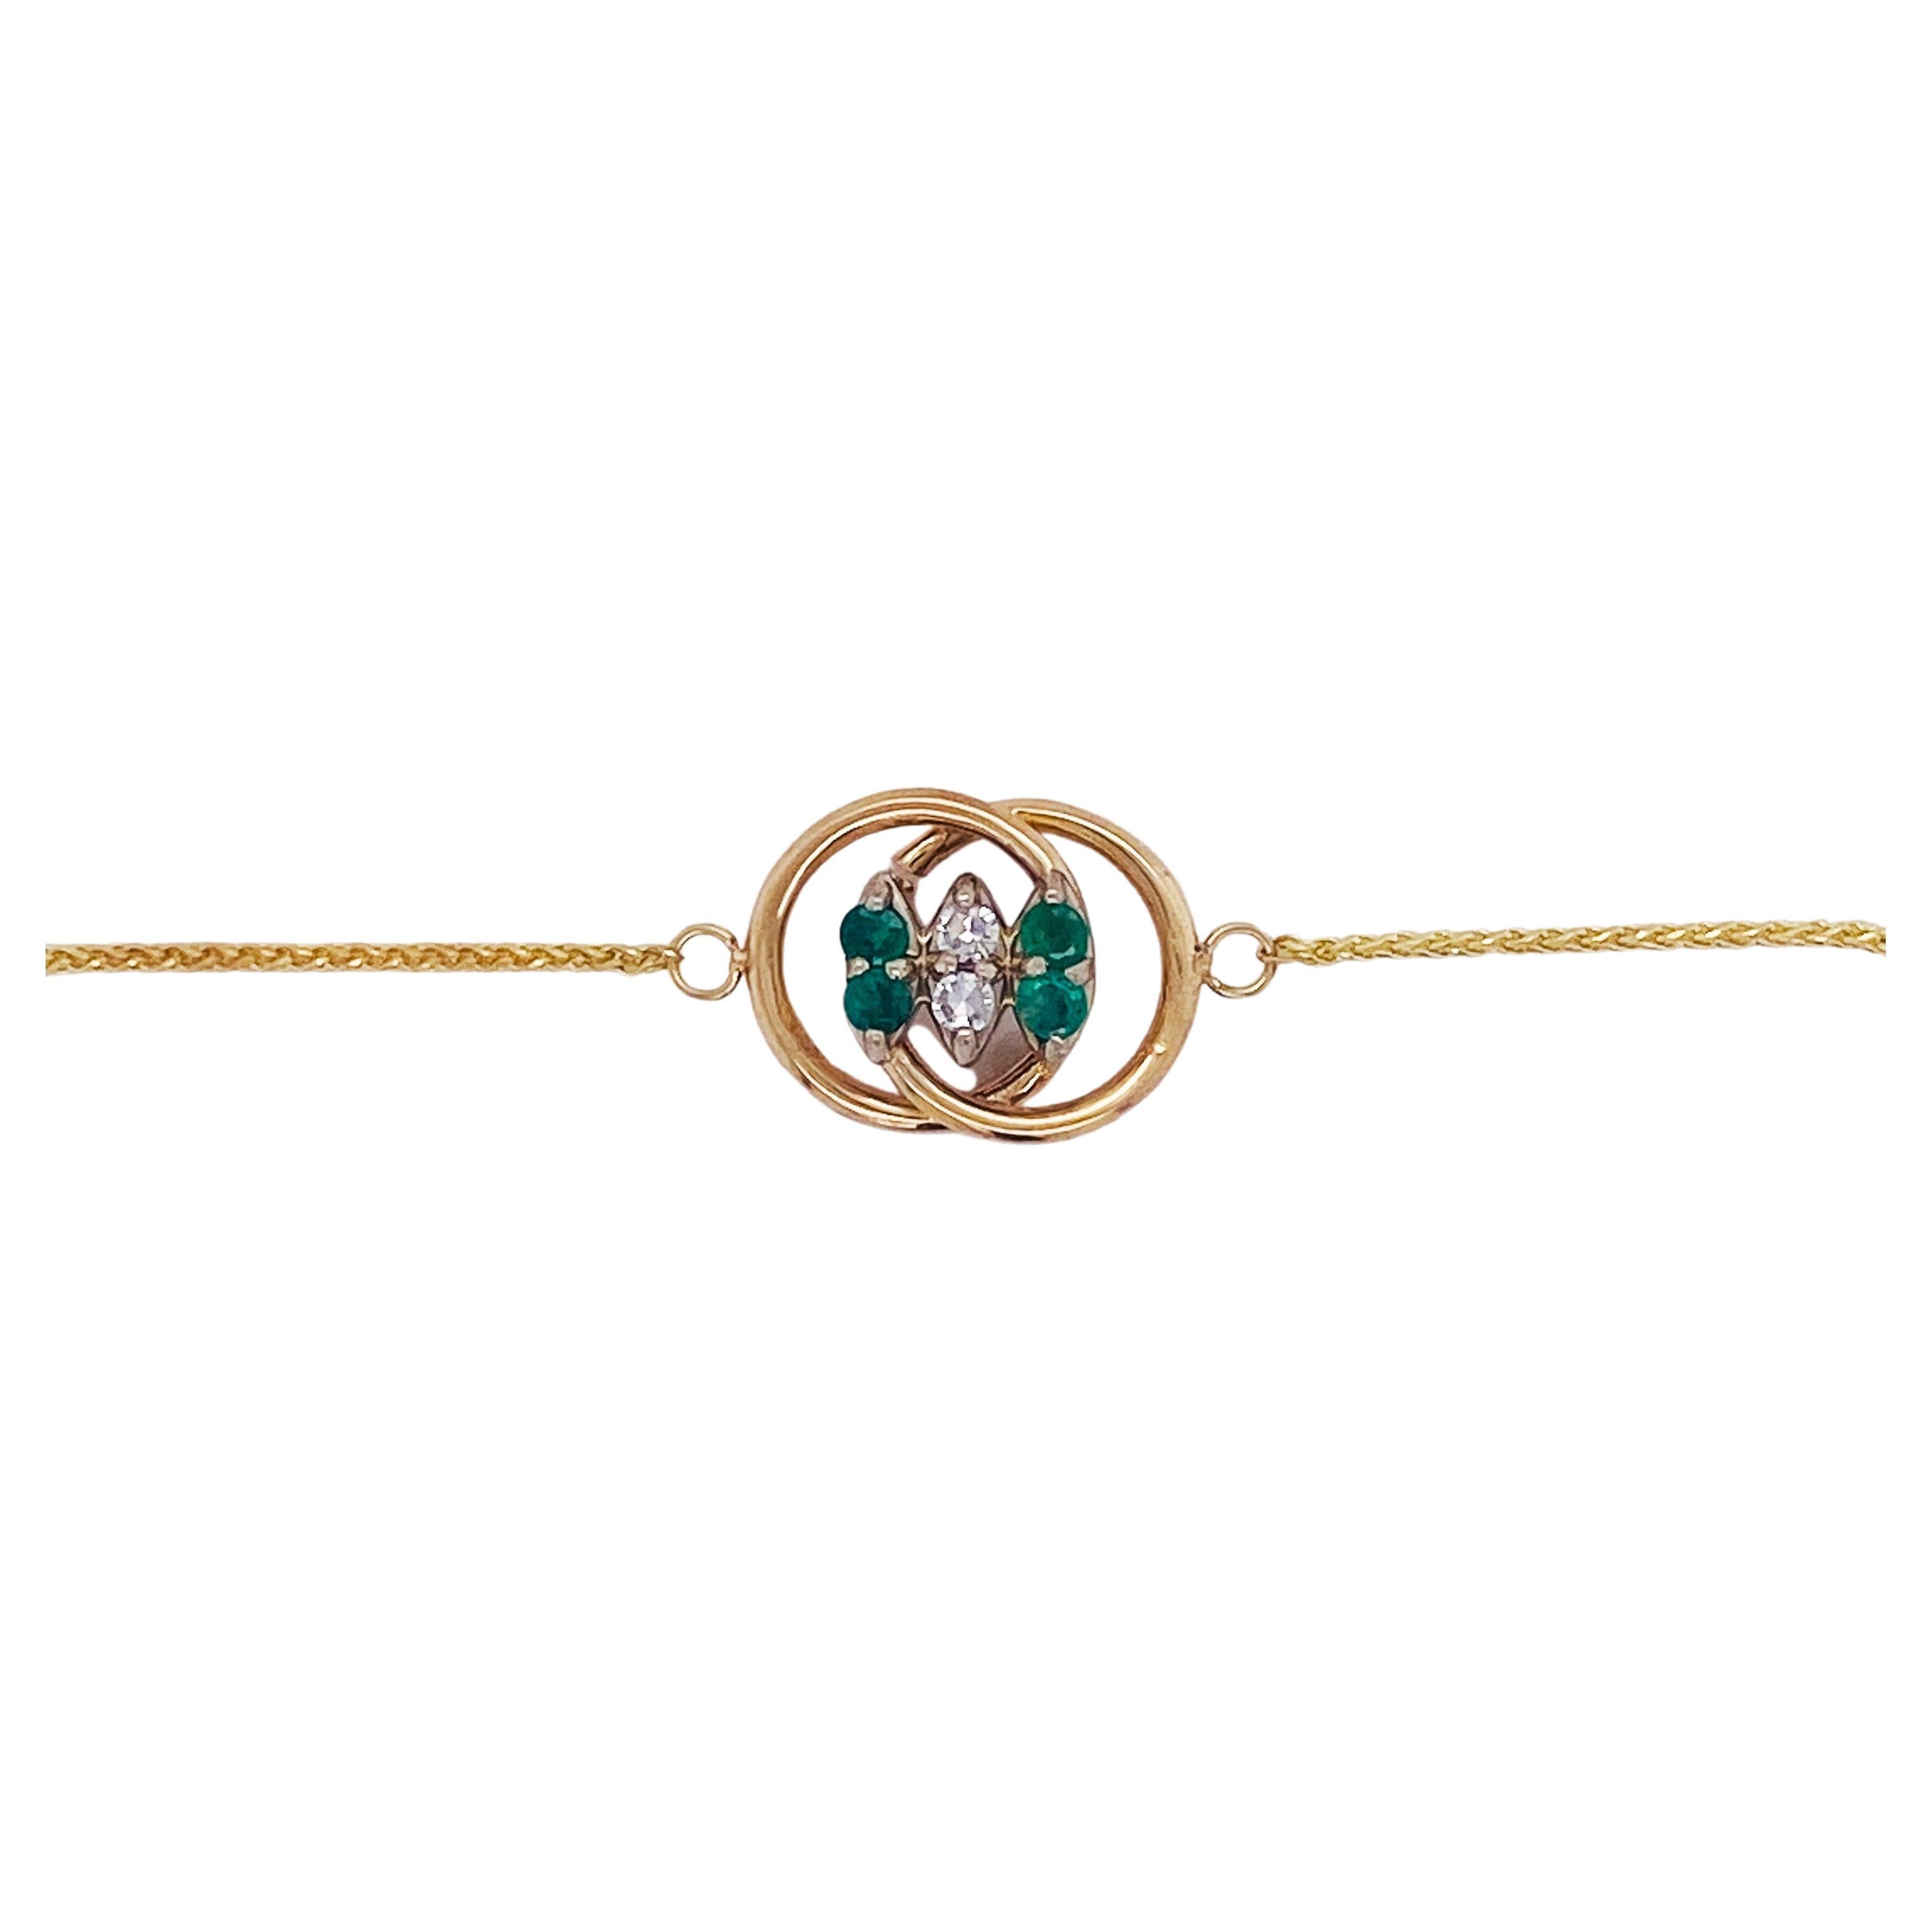 This 14 karat yellow gold bracelet matches everything and is the perfect addition to any outfit, casual or formal. The emerald and diamond pendant adds a cute touch and pop of color! It has 0.08 ct emeralds and 0.04 ct diamonds. The bolo clasp on